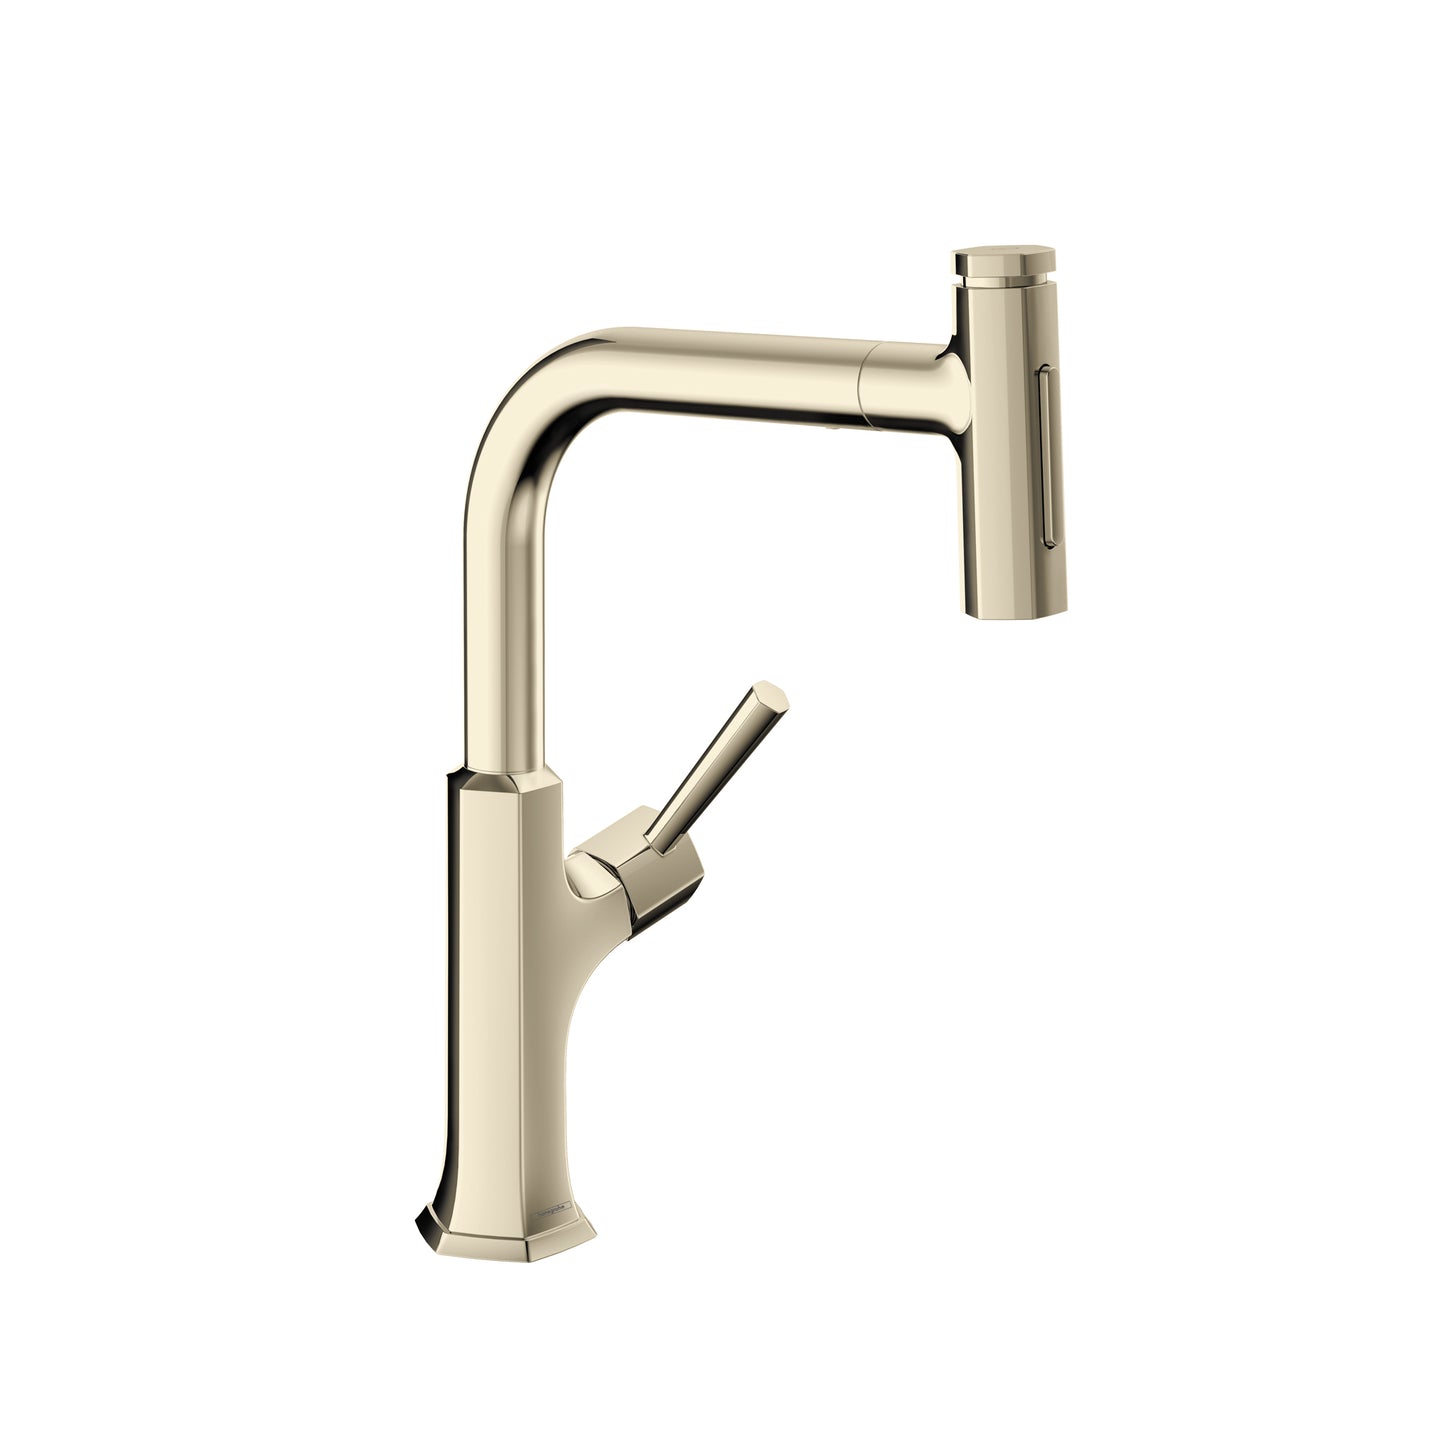 HANSGROHE 04828830 Polished Nickel Locarno Transitional Kitchen Faucet 1.75 GPM